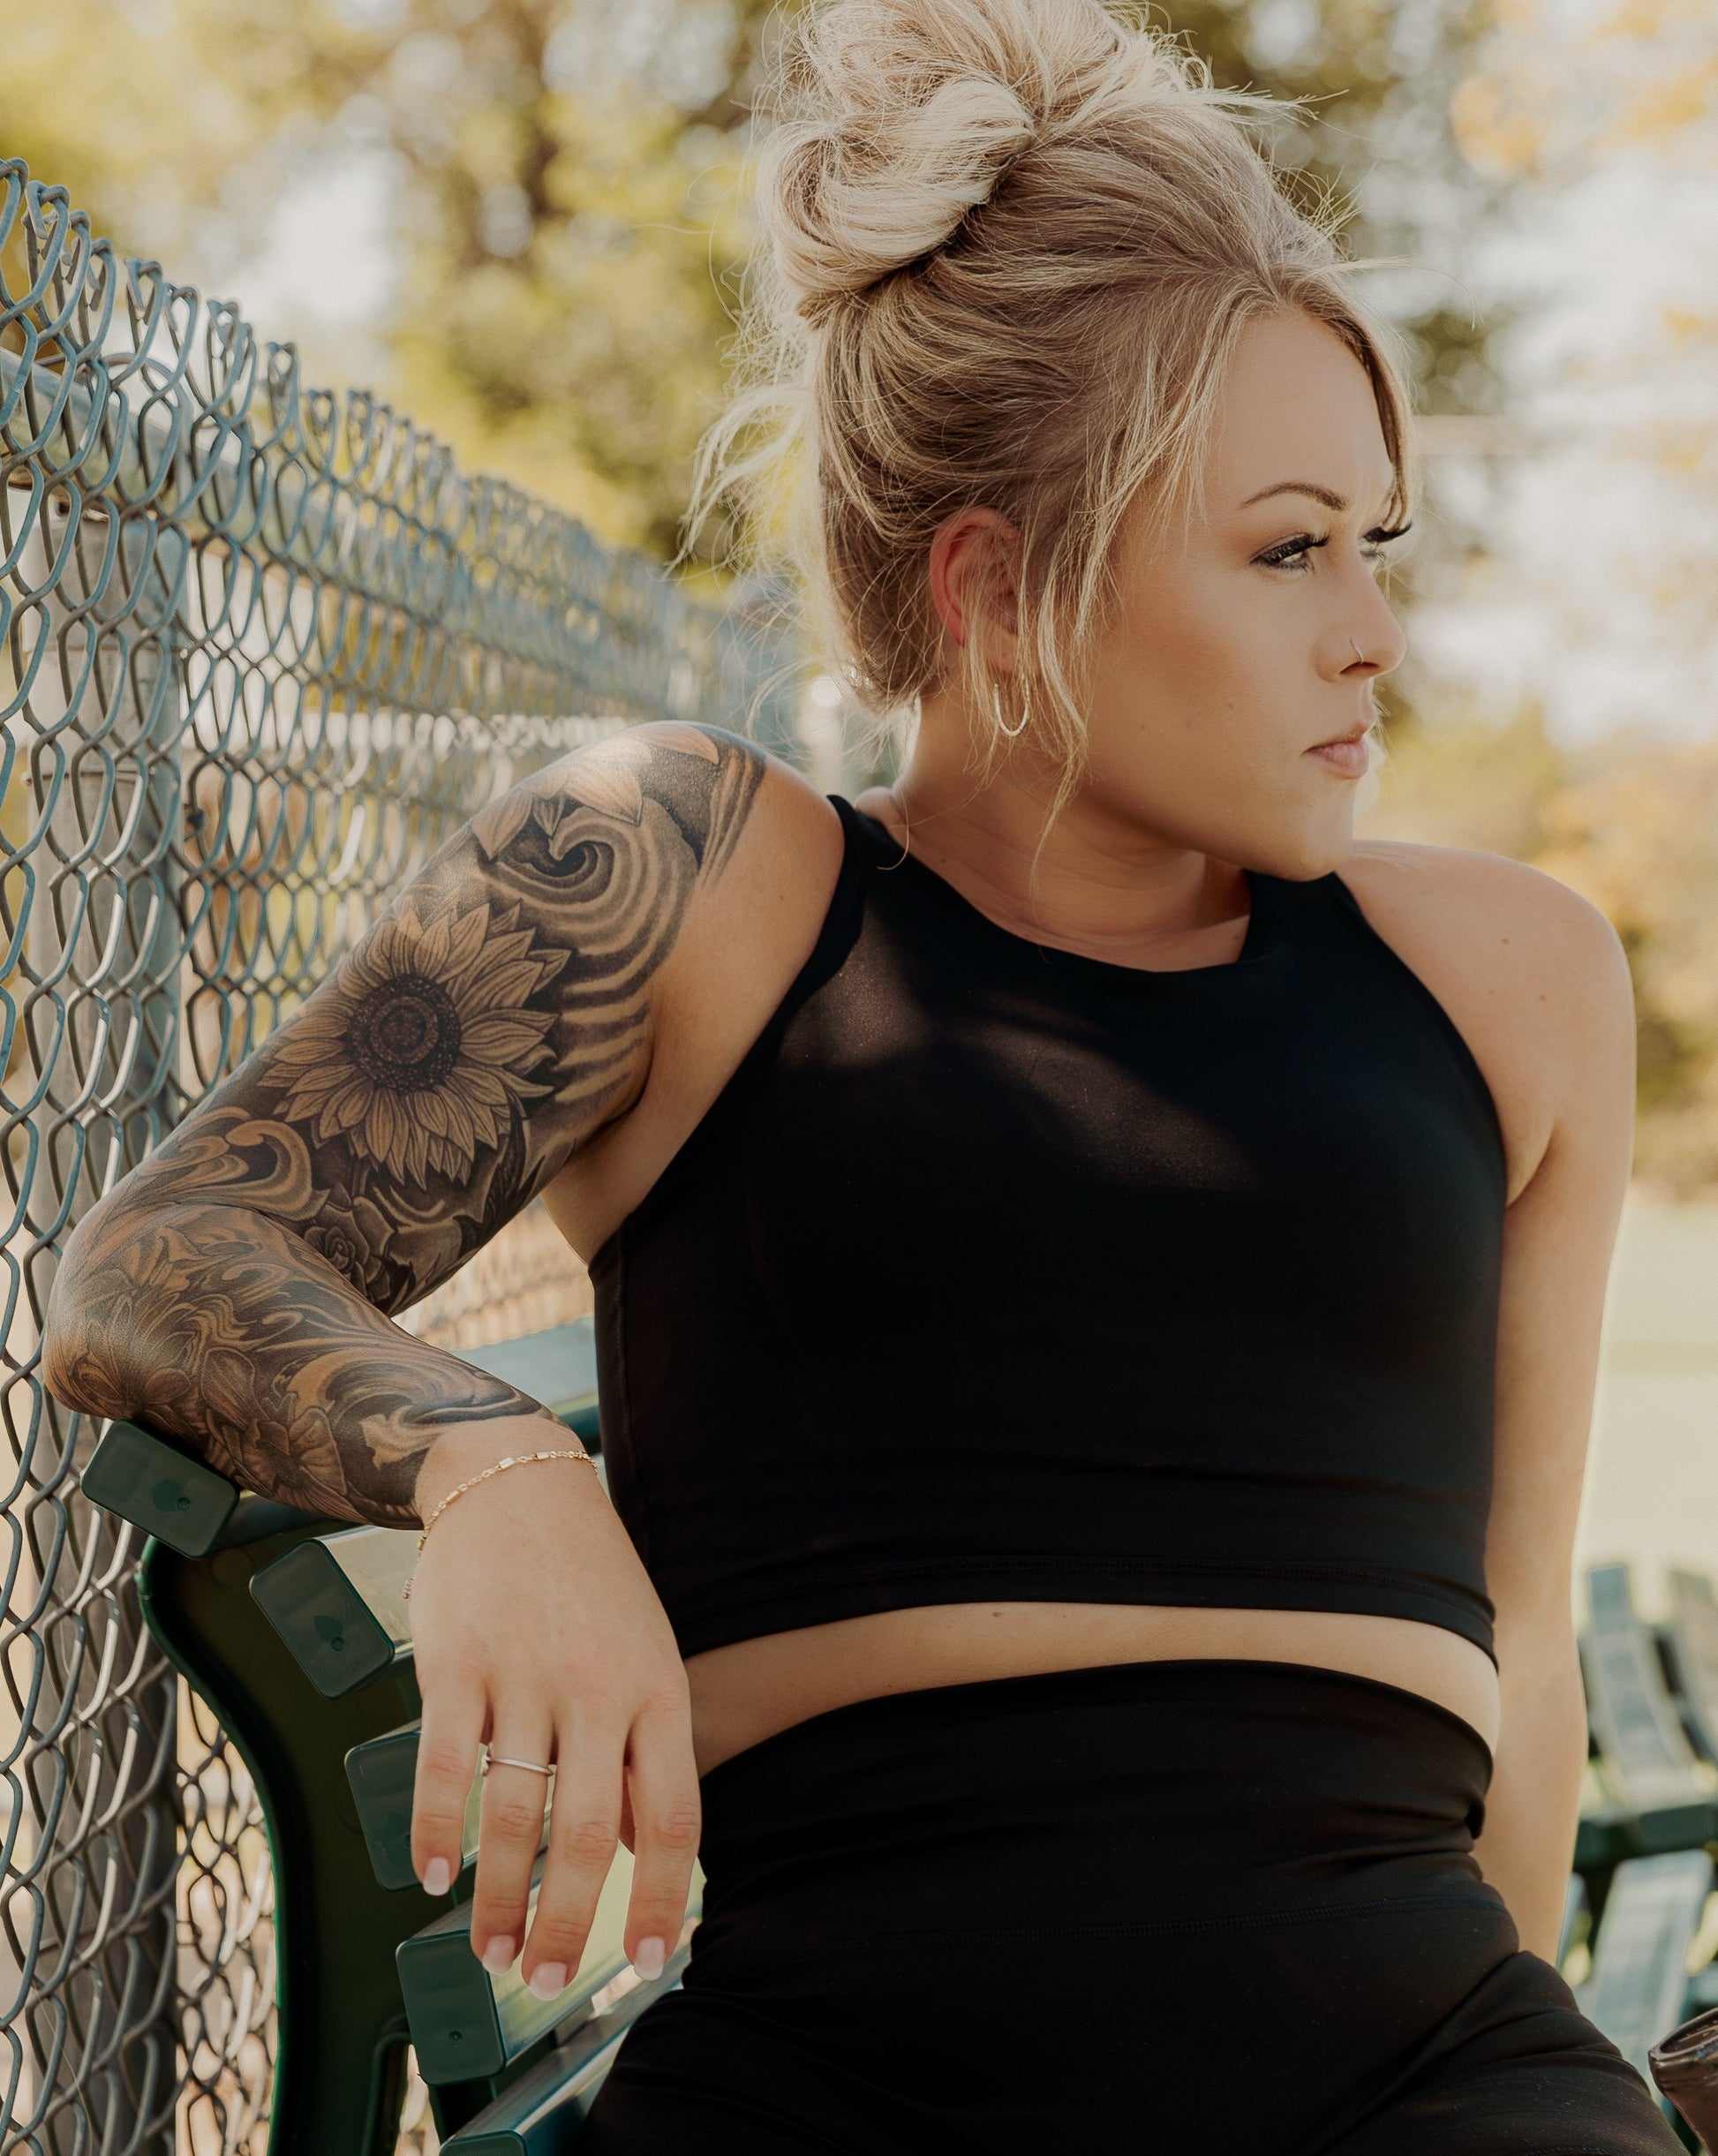 Blonde haired women sitting on a bench at the tennis court.  Her hair is pulled up into a messy bun and she is looking off into the distance.  She is wearing a black tank top with a built in bra and matching black biker shorts.